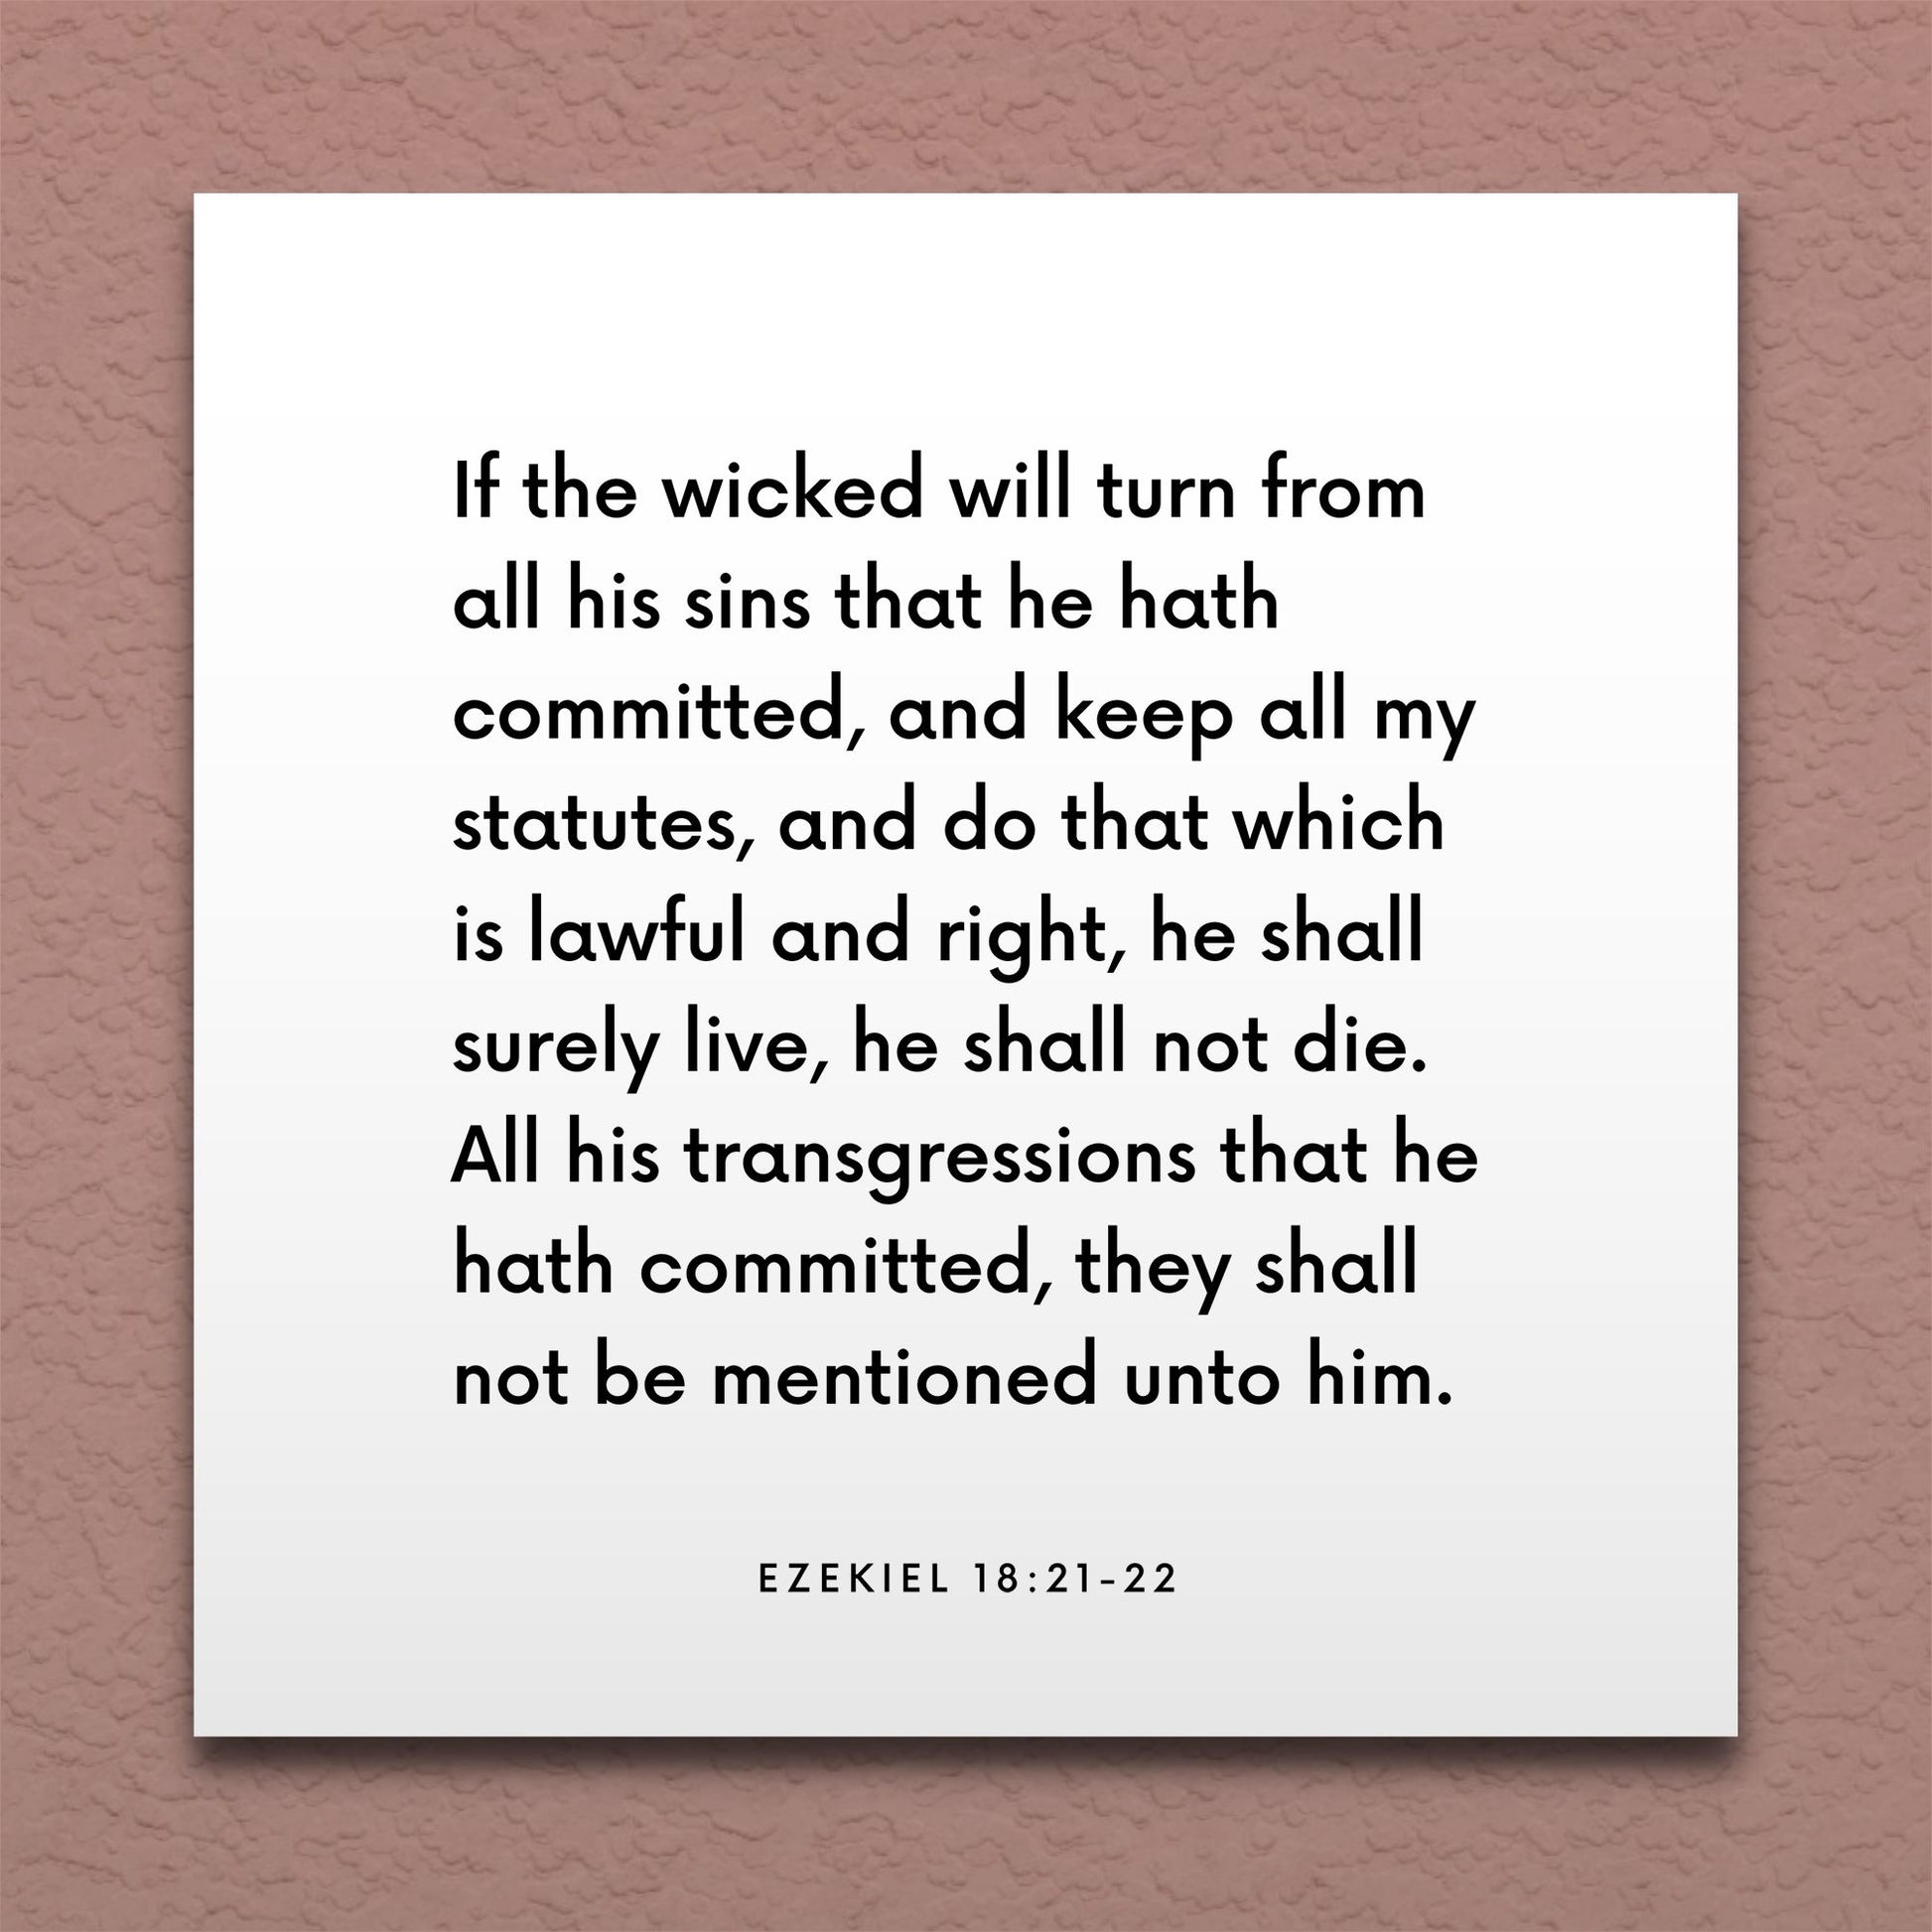 Wall-mounted scripture tile for Ezekiel 18:21-22 - "If the wicked will turn from all his sins"